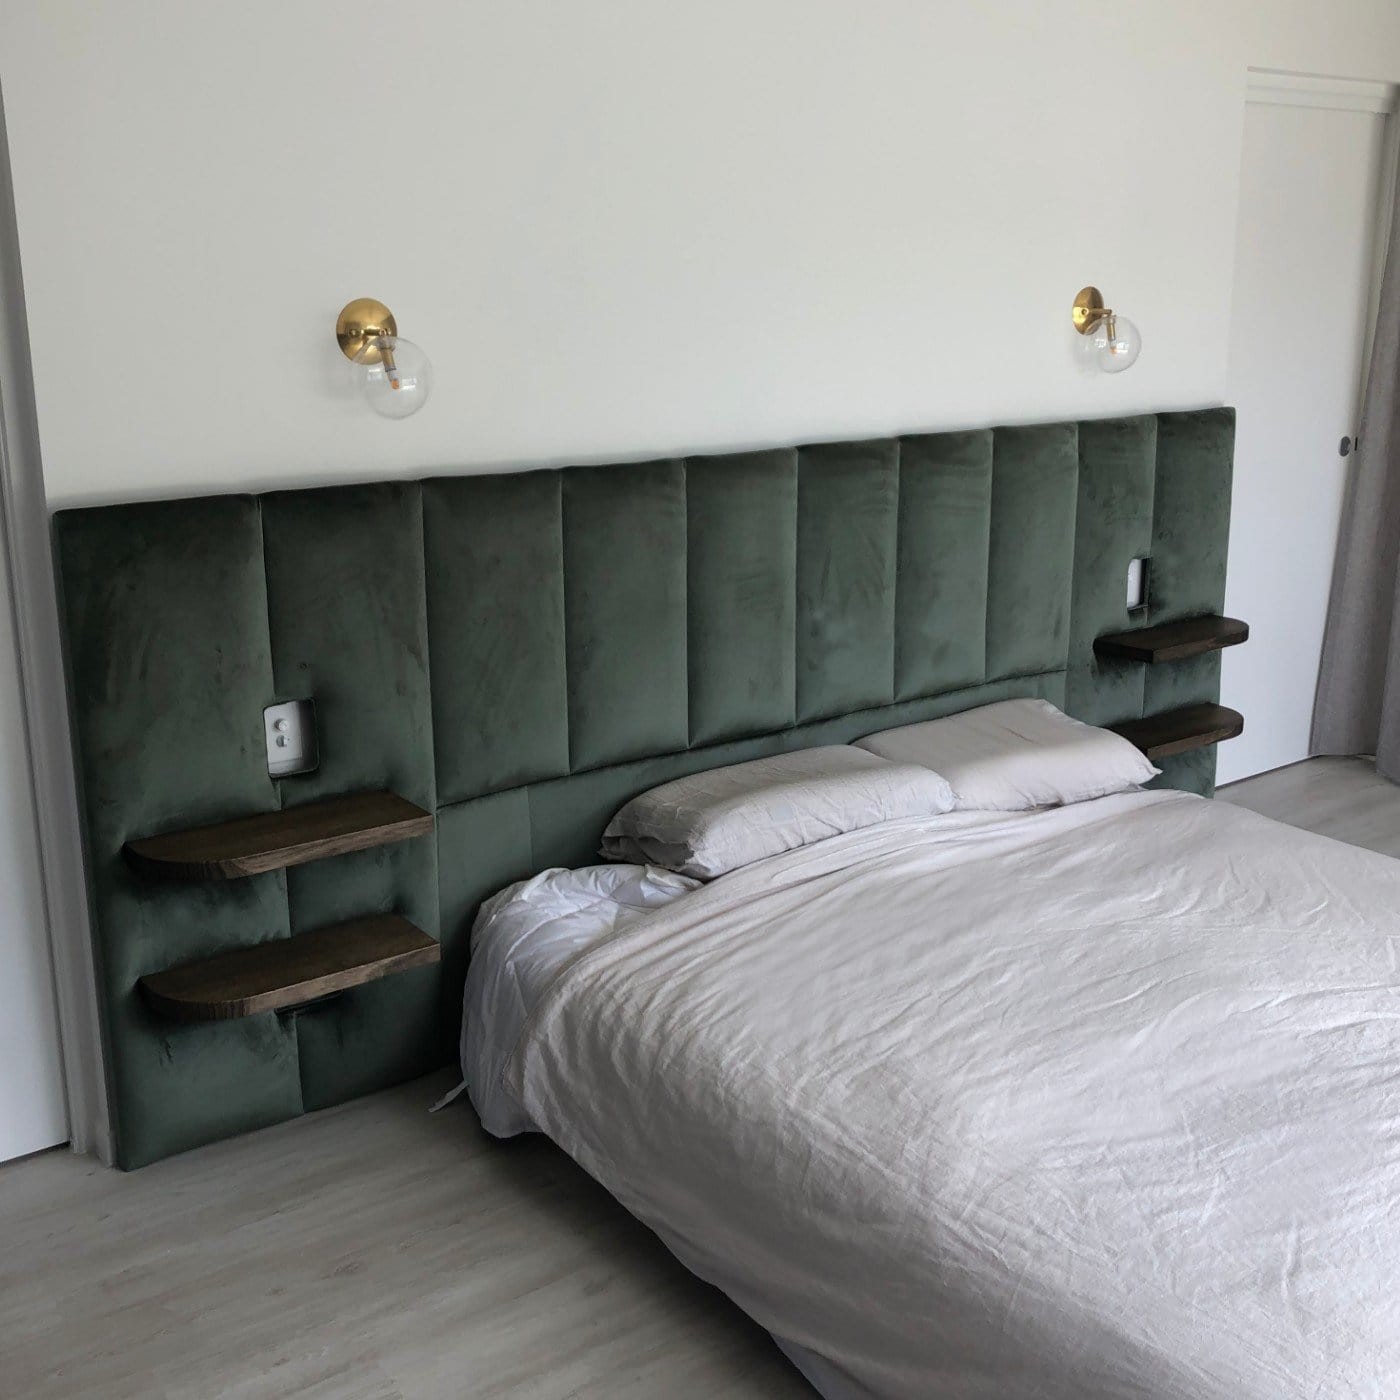 extra wide headboard velvet green panels with light switch wall sconces